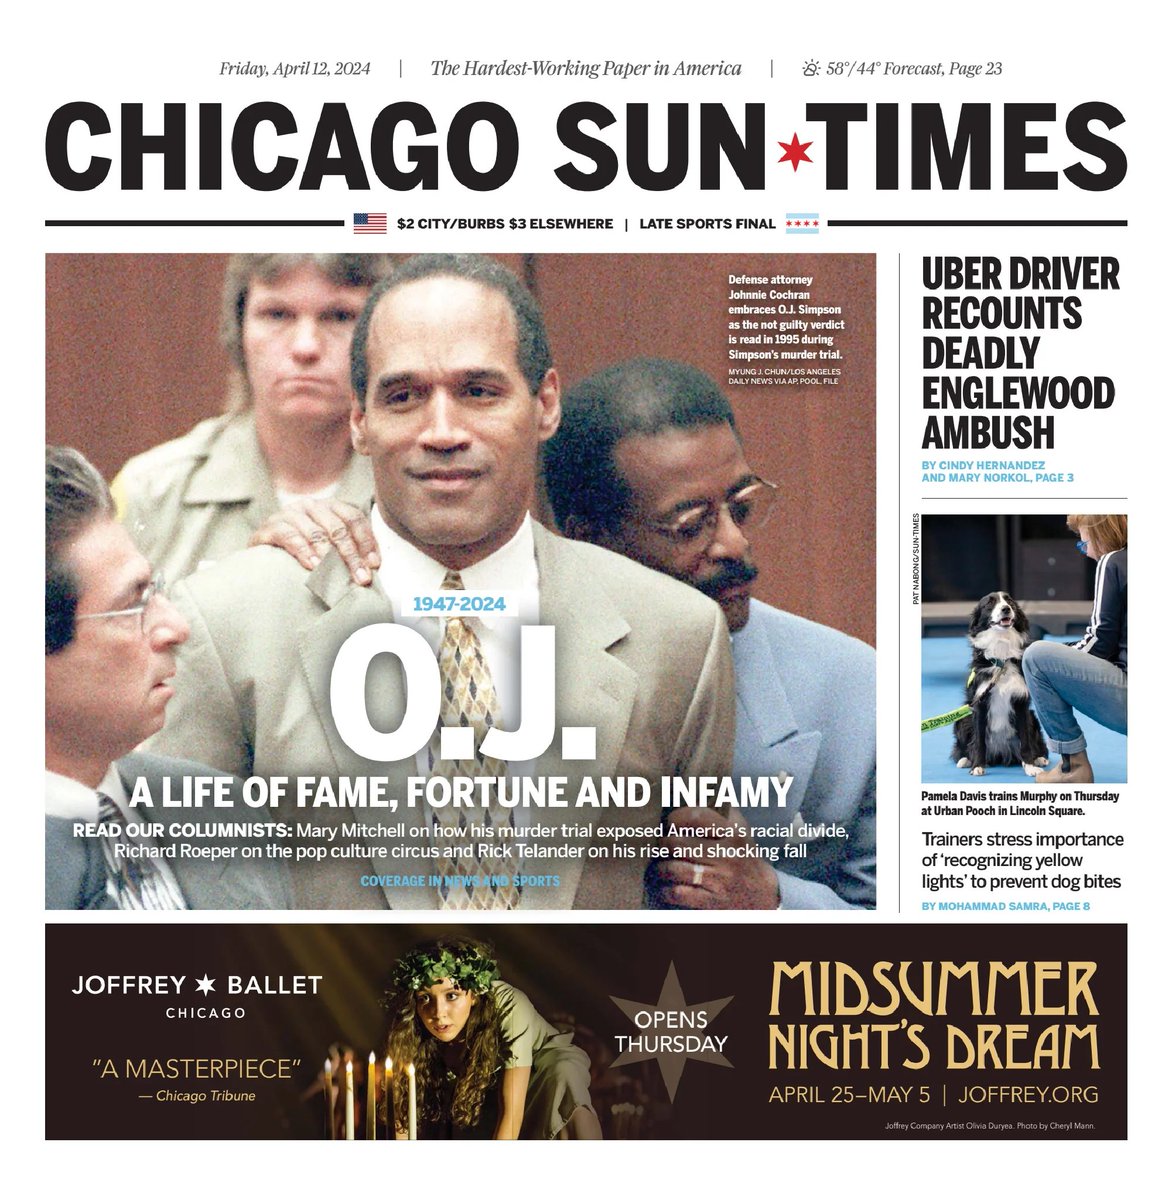 🇺🇸 Uber Driver Recounts Deadly Englewood Ambush

▫Came under fire in the 600 block of West 69th Street. Hernandez sped away. His passenger was wounded and died at hospital
▫Cindy Hernandez & @mary_norkol
▫is.gd/rGHmhd

#frontpagestoday #USA @Suntimes 🇺🇸